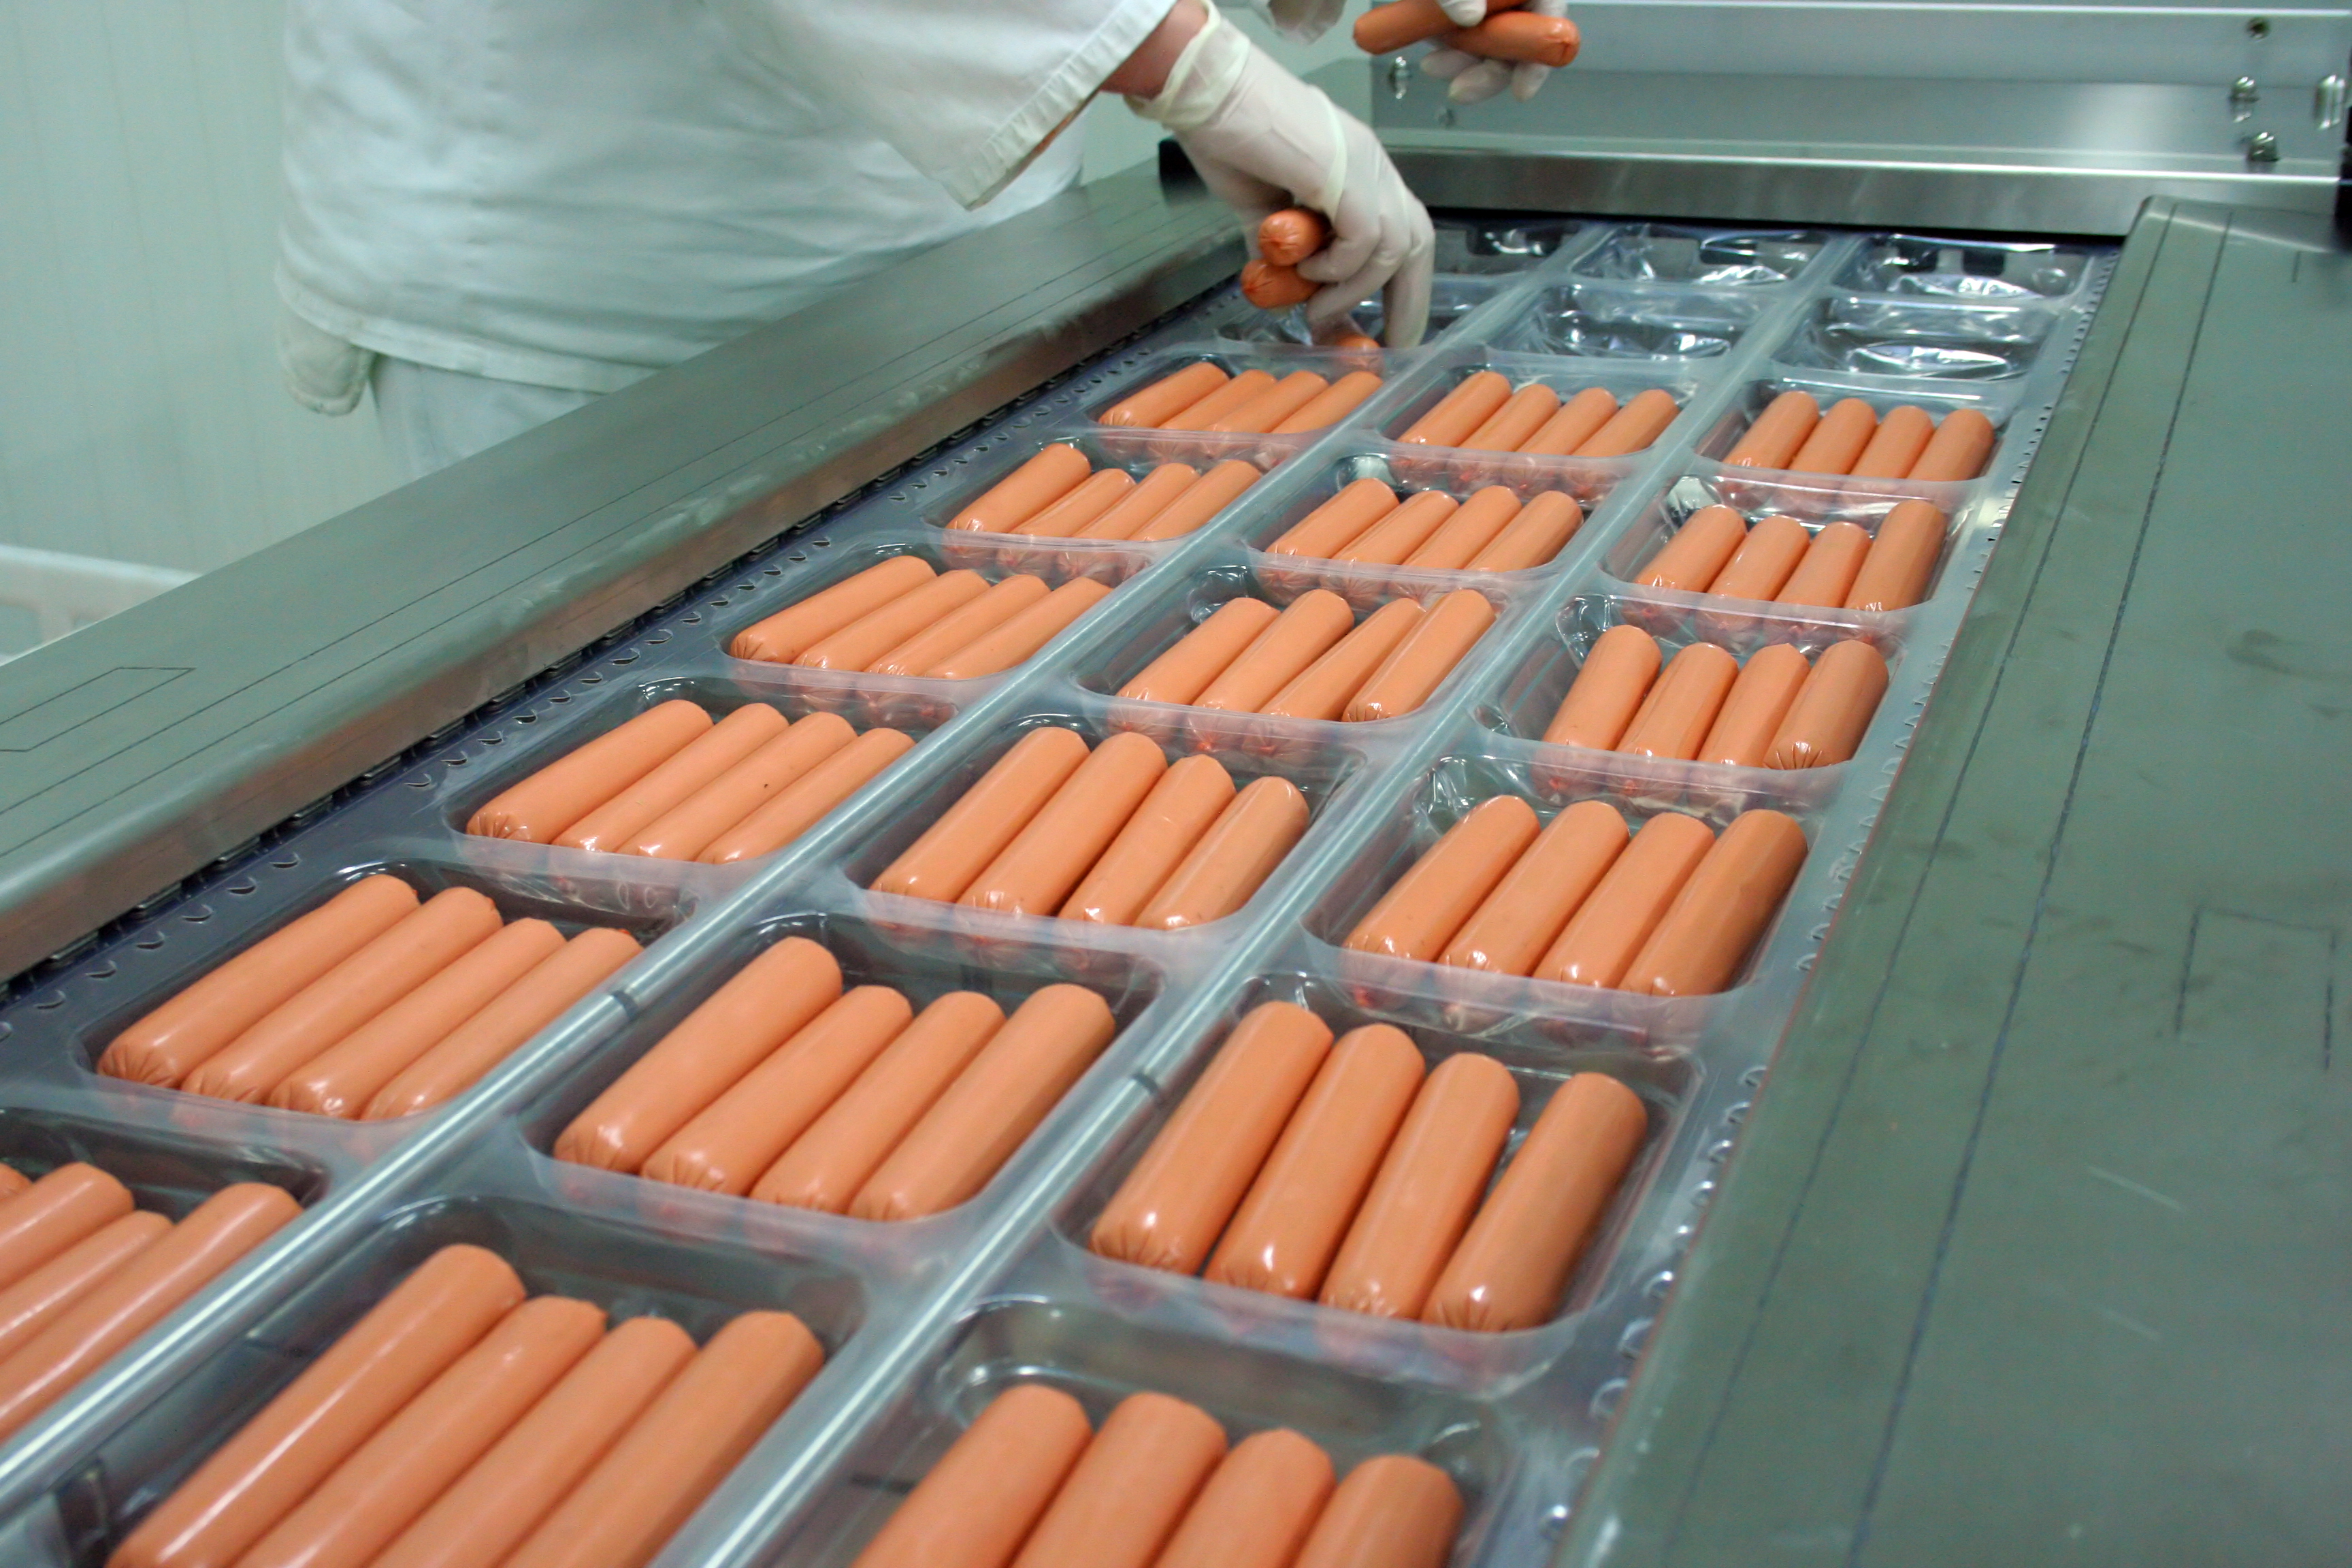 Weenies are prepared for packing in factory